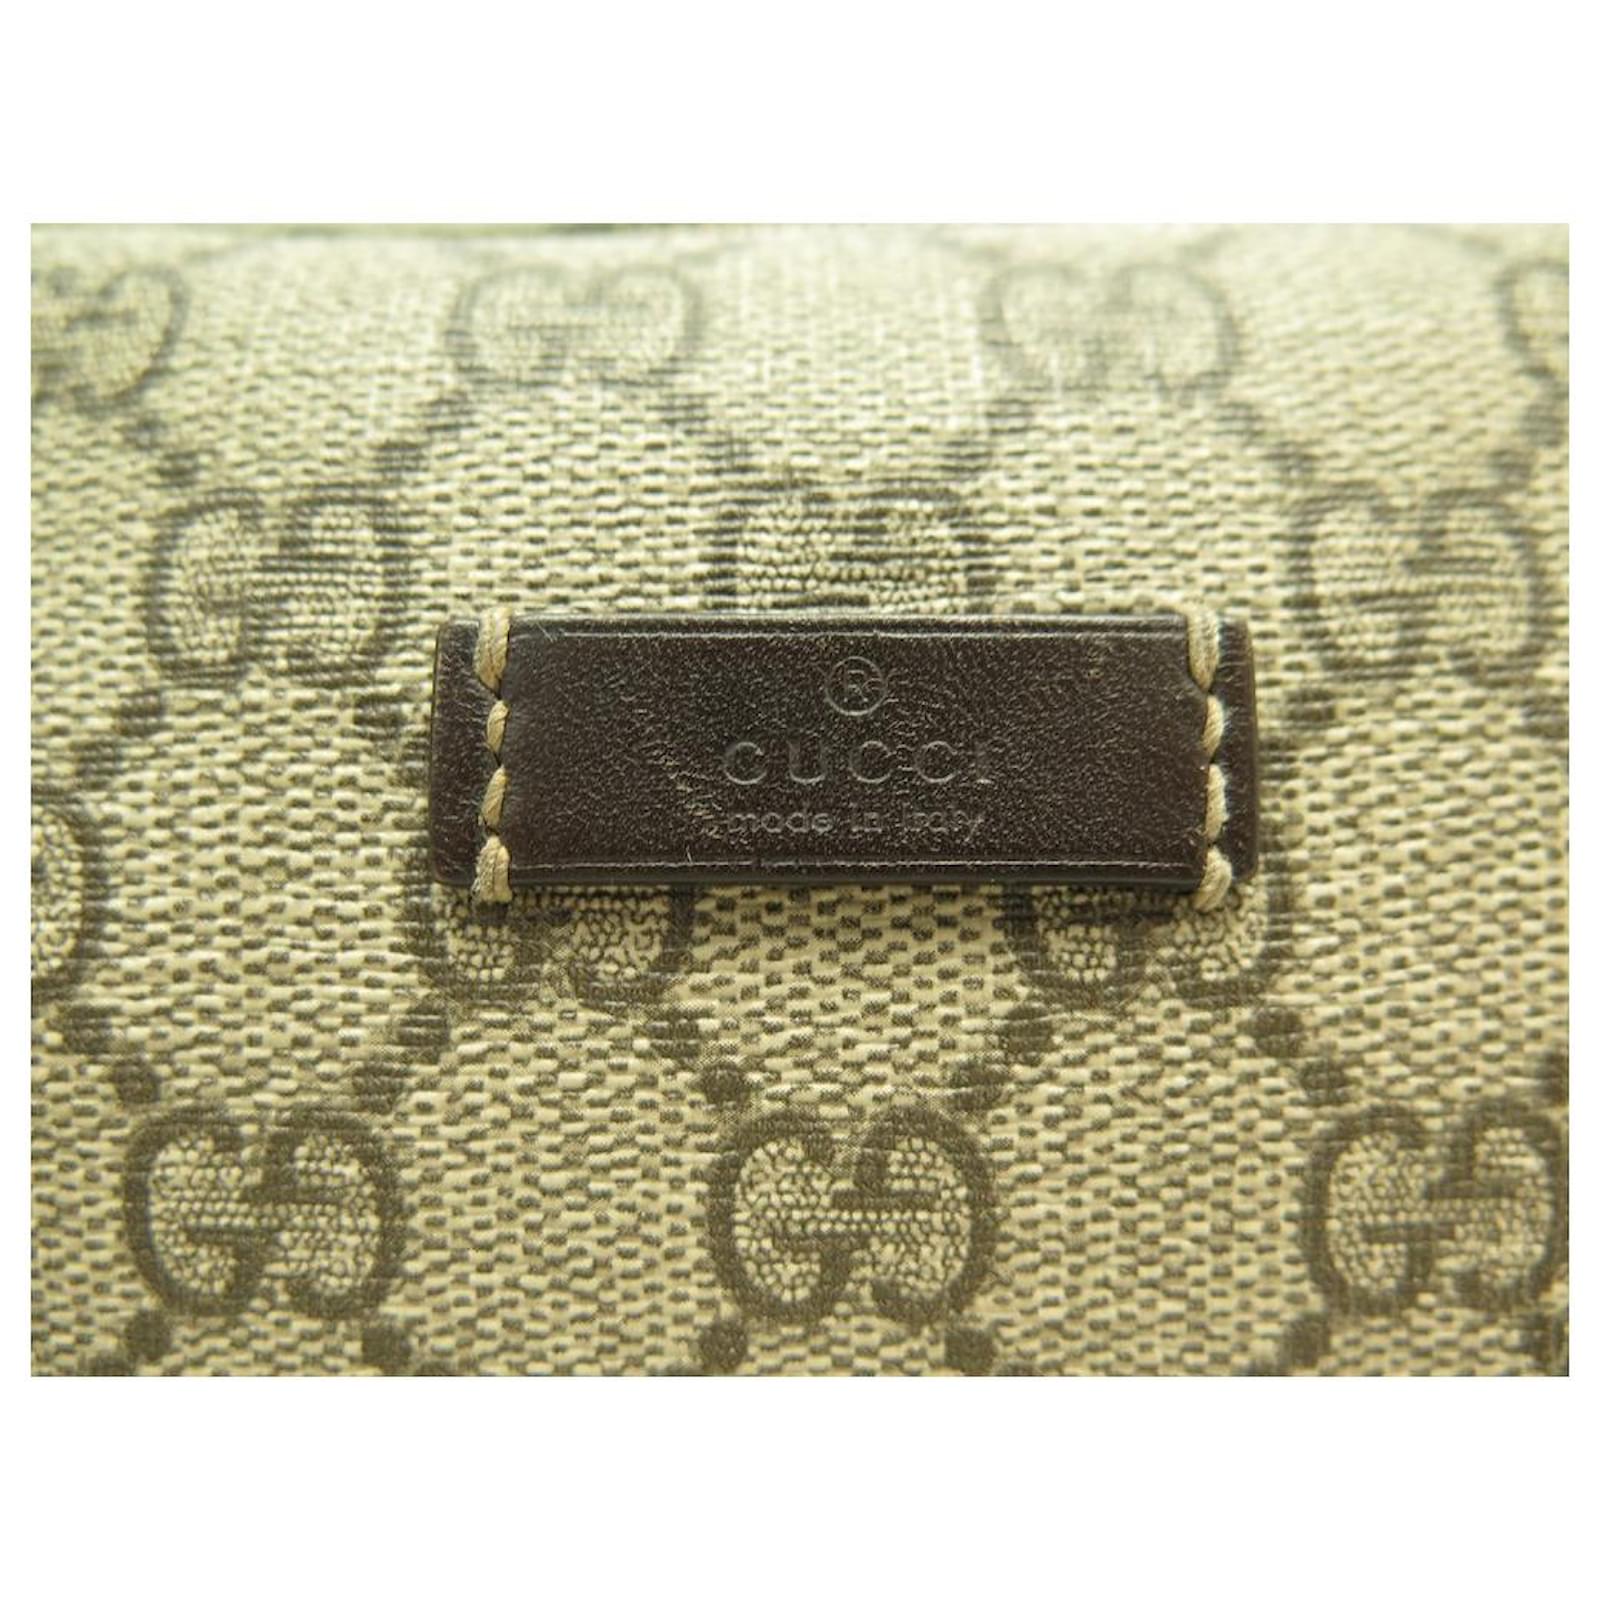 Gucci GG Canvas Toiletry Bag - Neutrals Cosmetic Bags, Accessories -  GUC638785